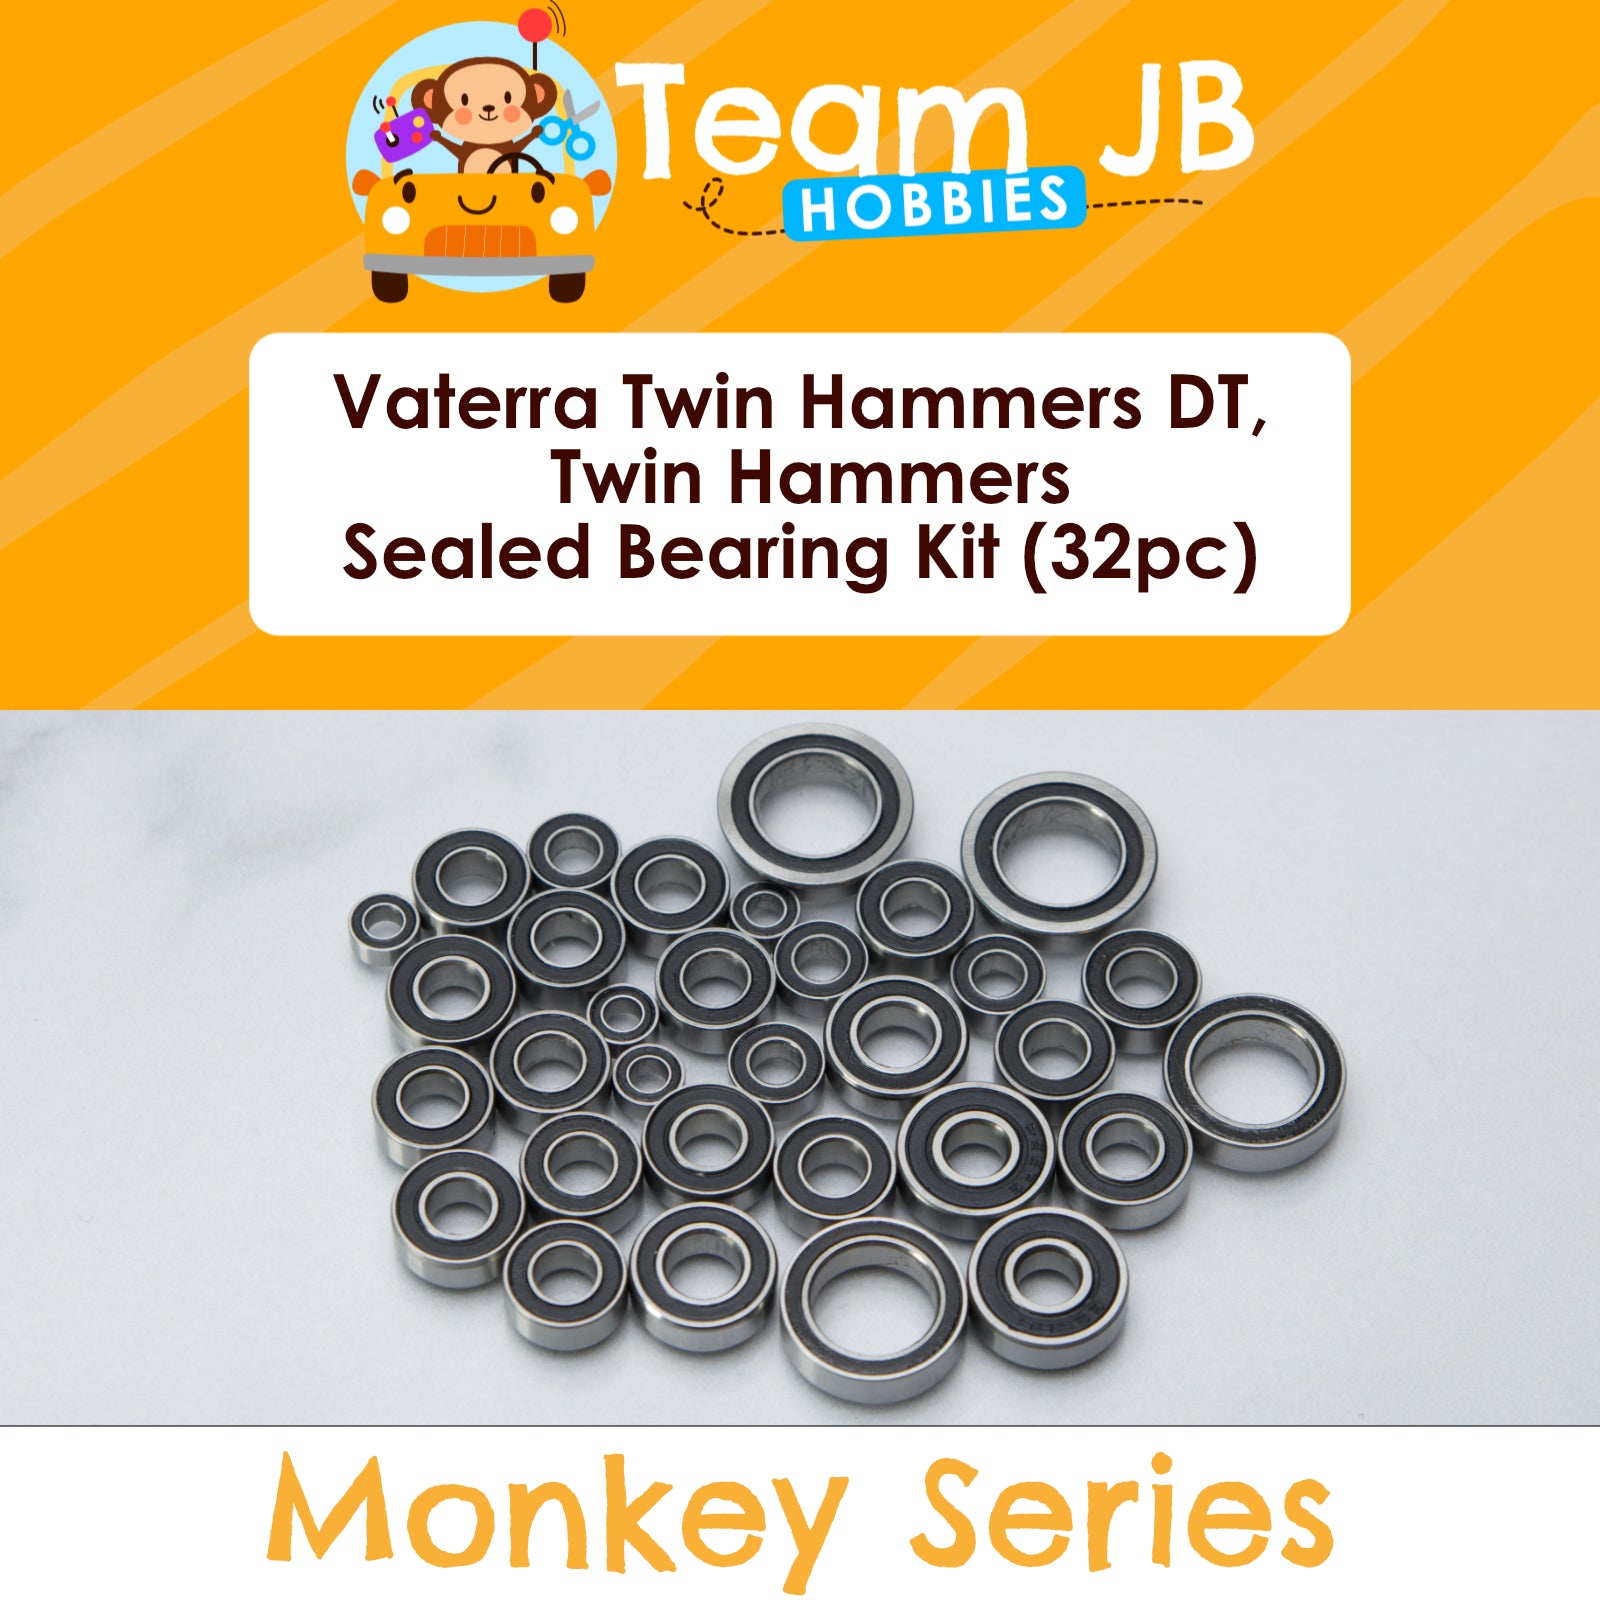 Vaterra Twin Hammers DT, Twin Hammers - Sealed Bearing Kit